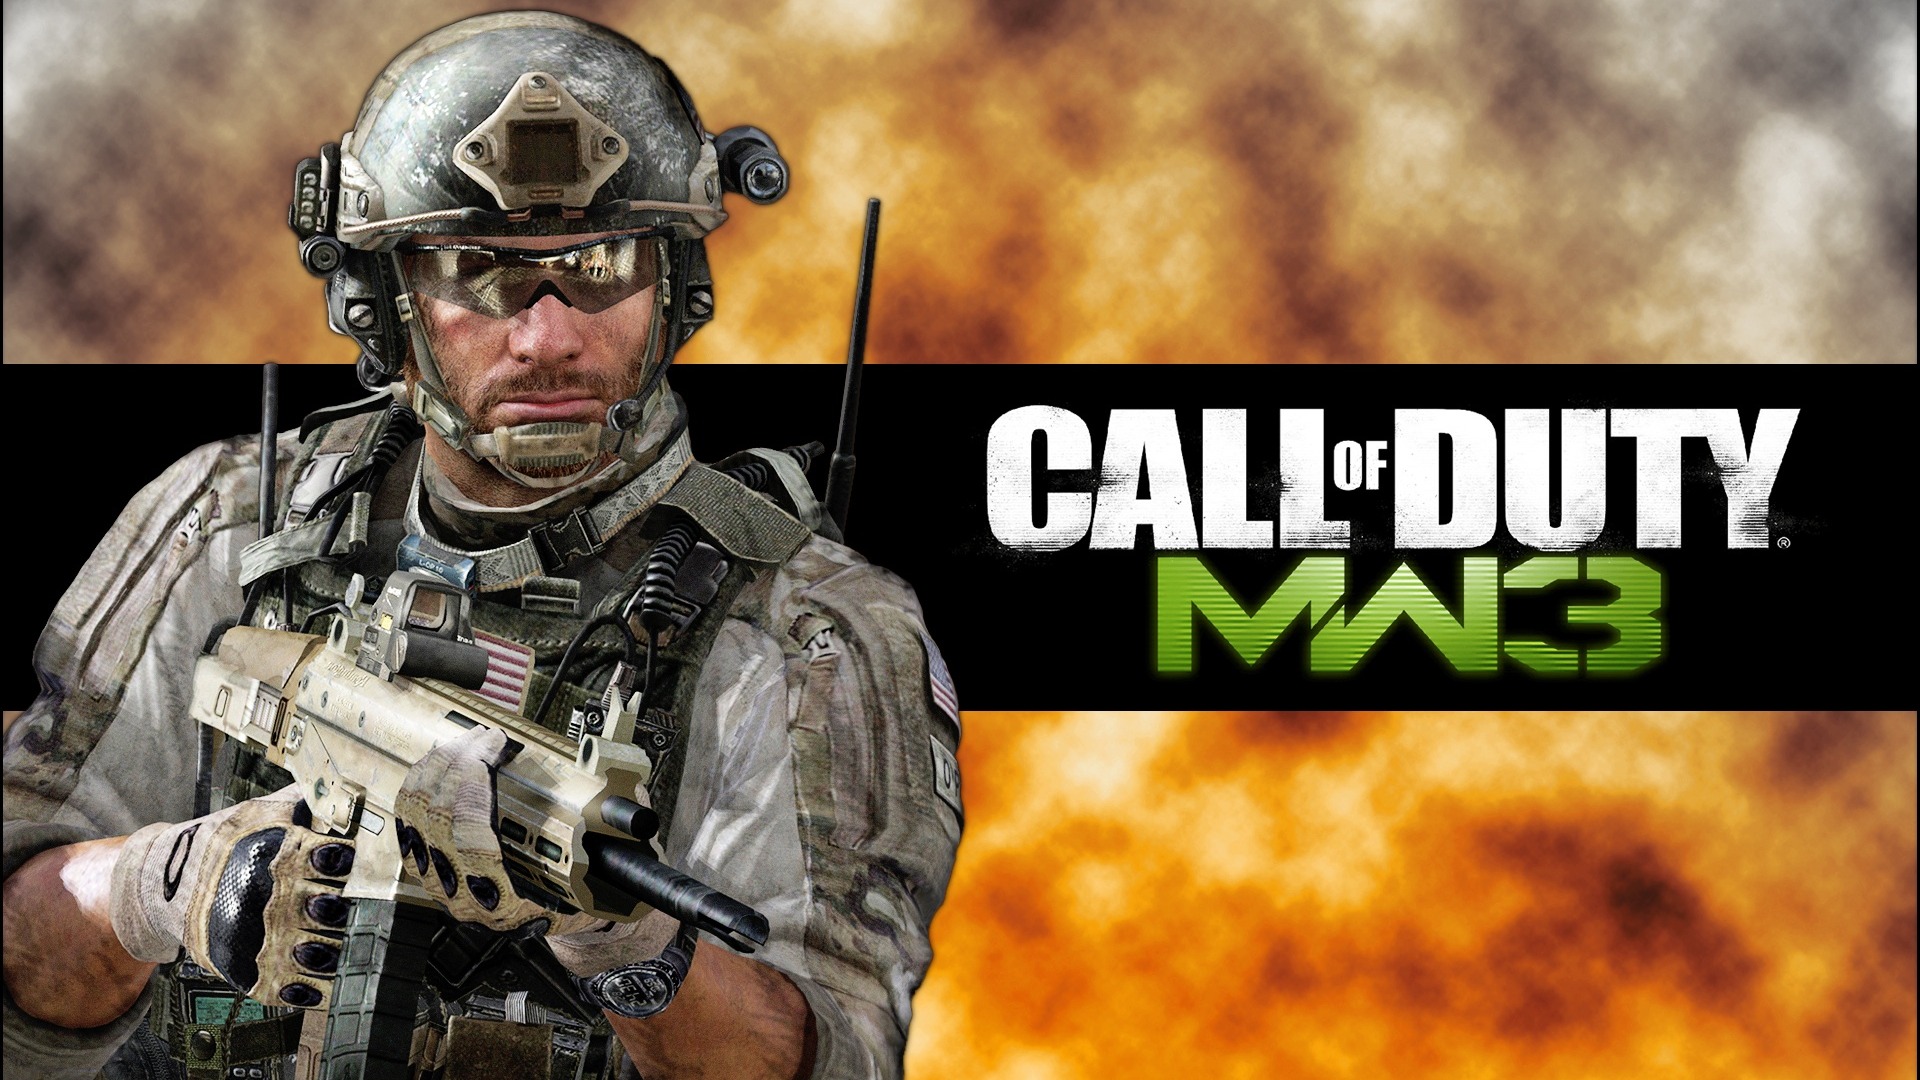 Call of Duty: MW3 wallpapers HD #14 - 1920x1080